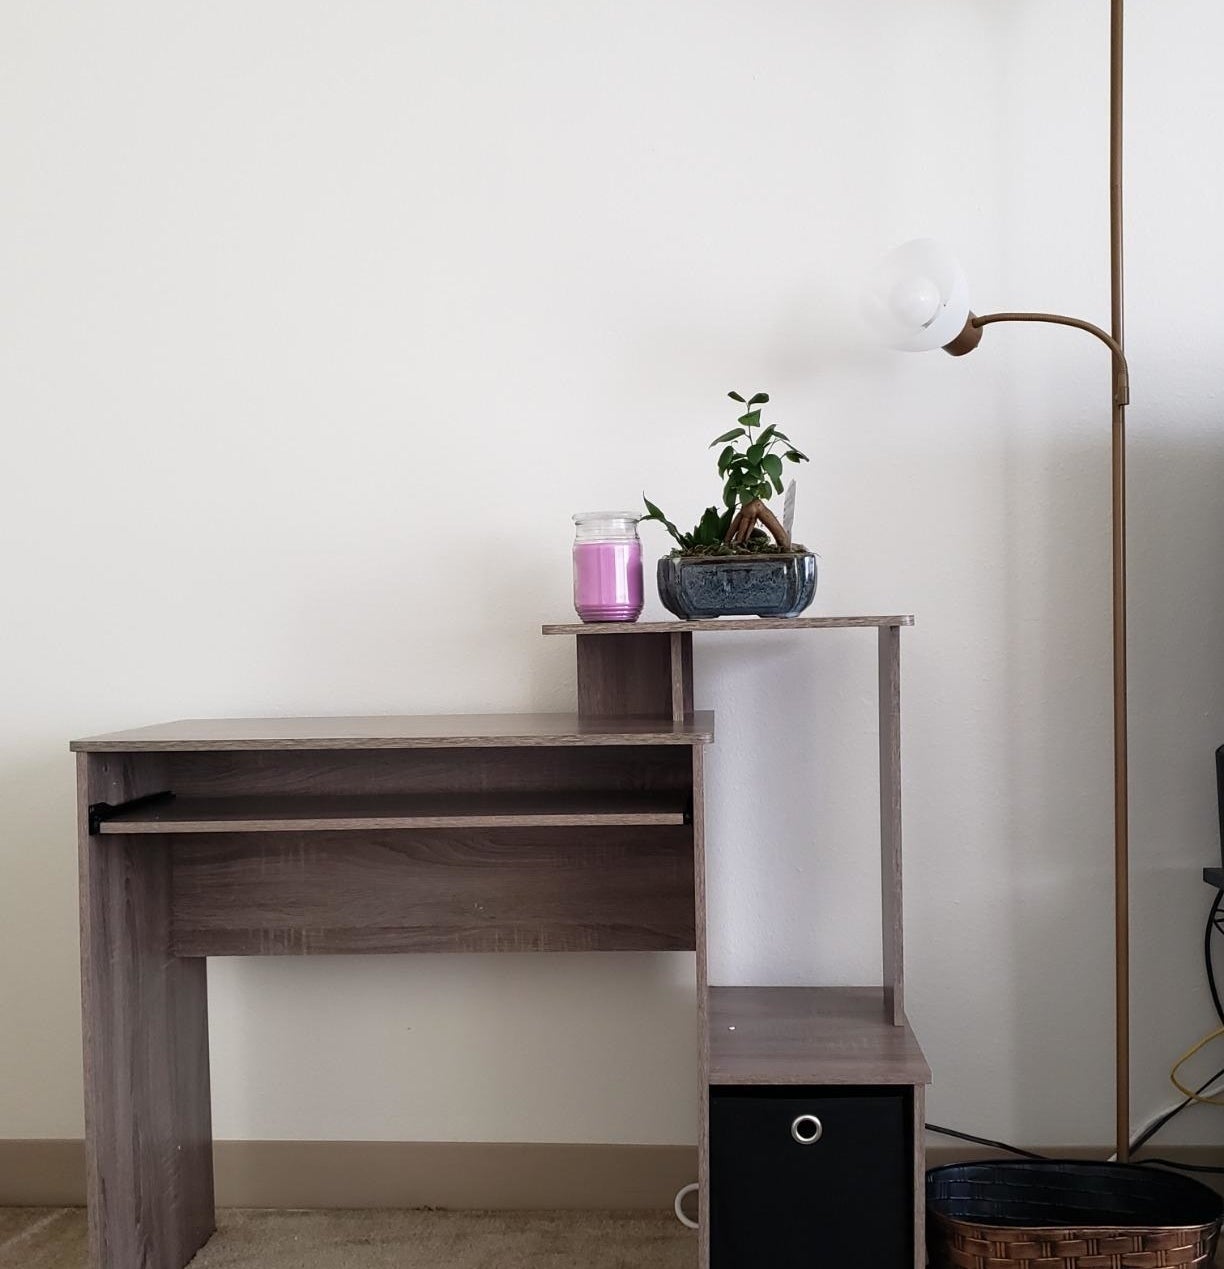 Reviewer image of brown desk with candle and plant on top of shelf